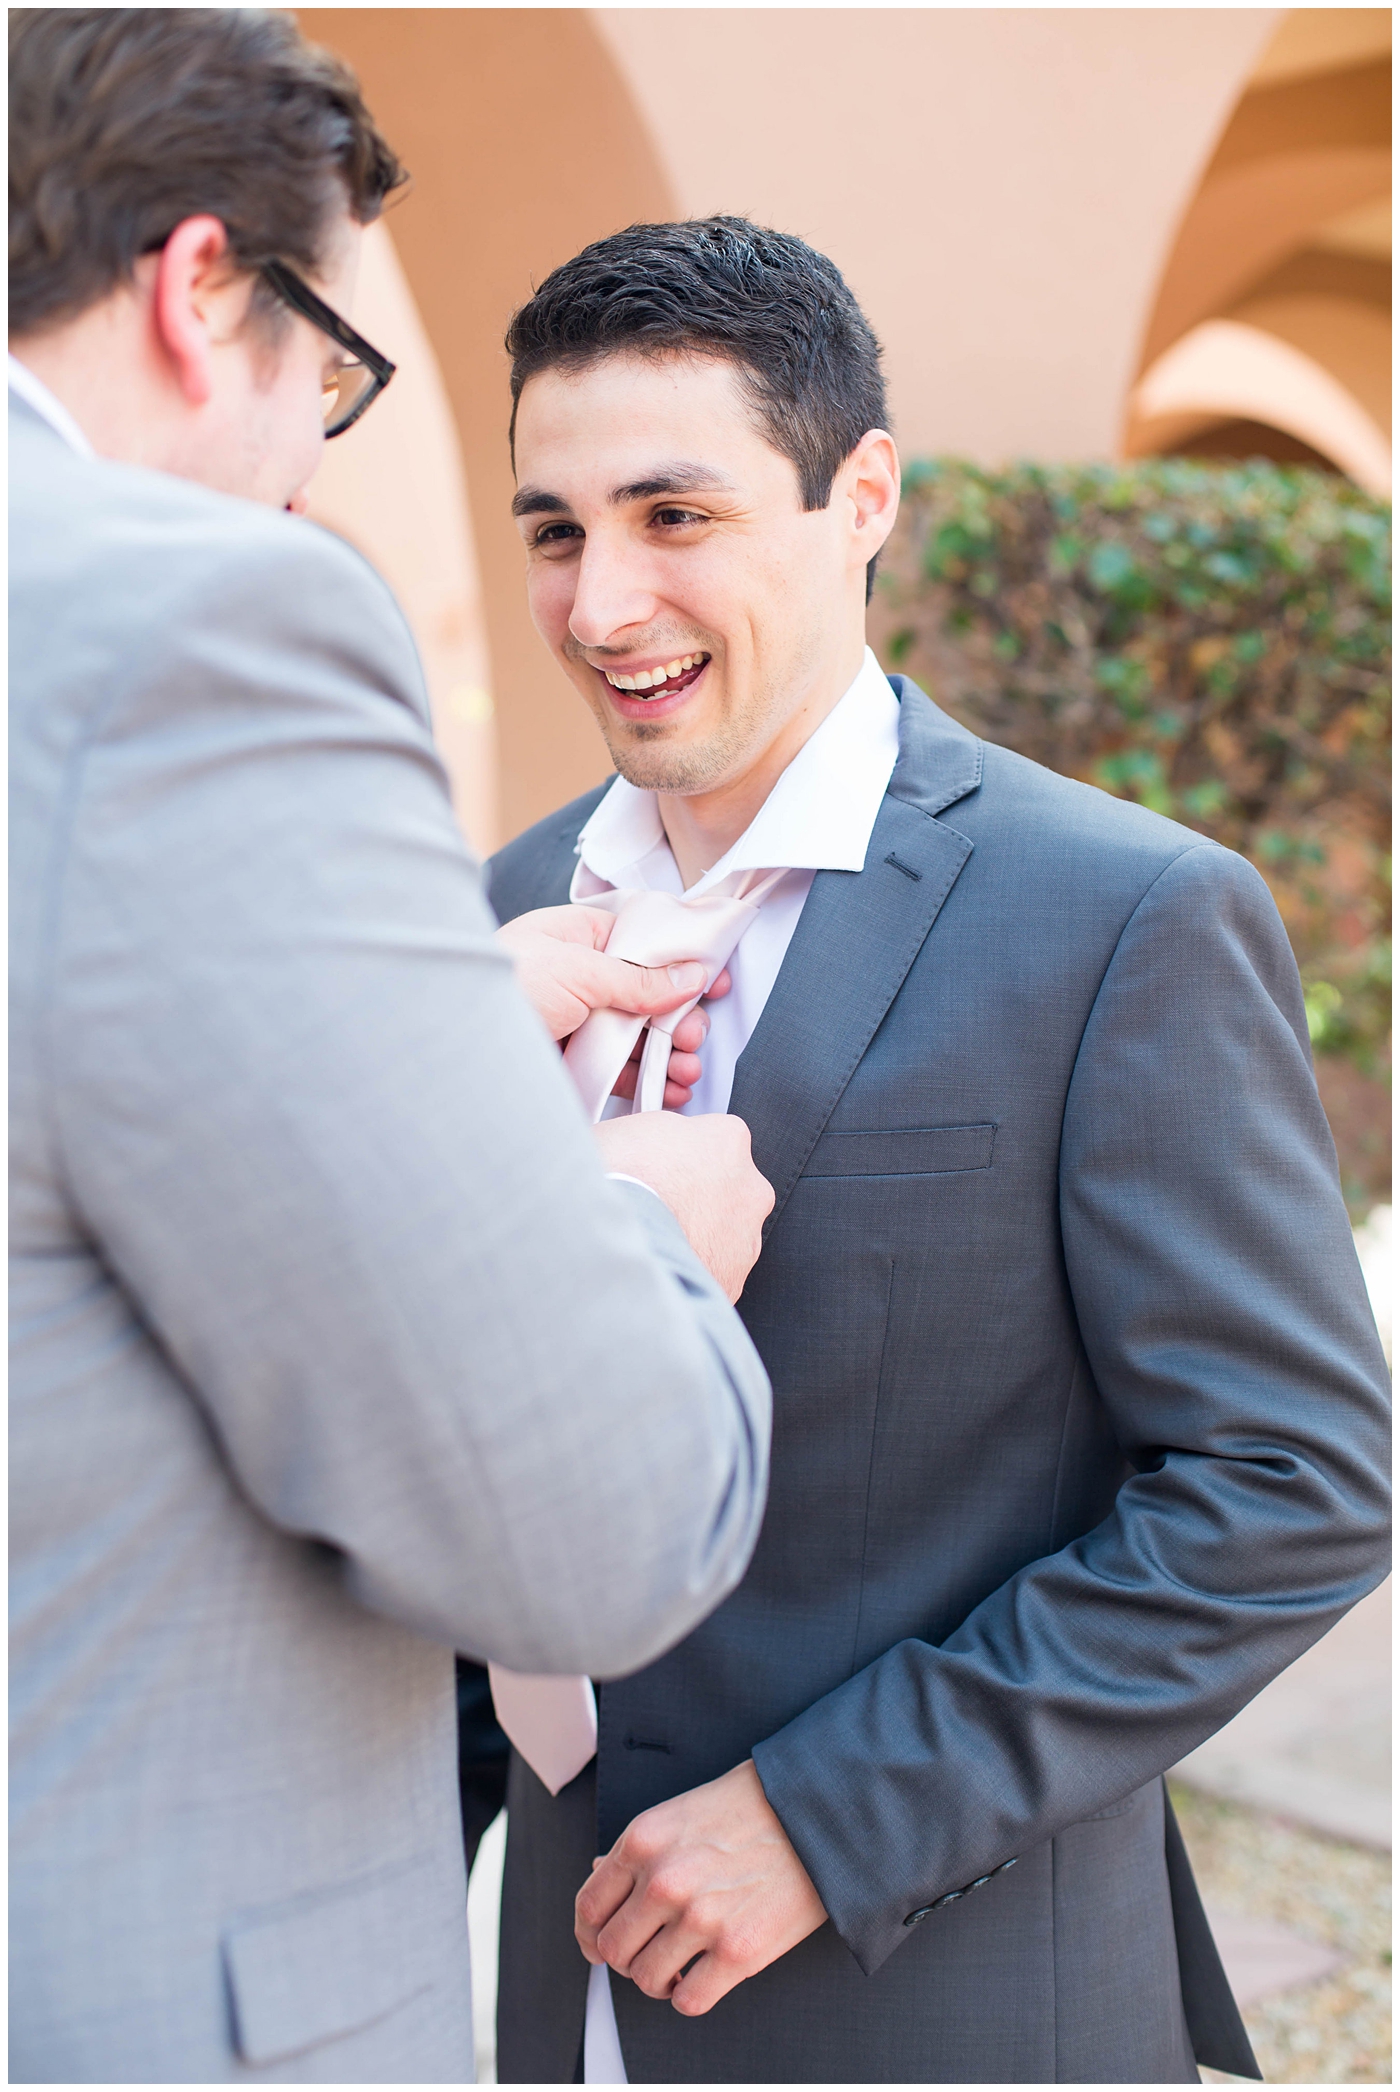 groom in gray suit with pink tie getting ready on wedding day